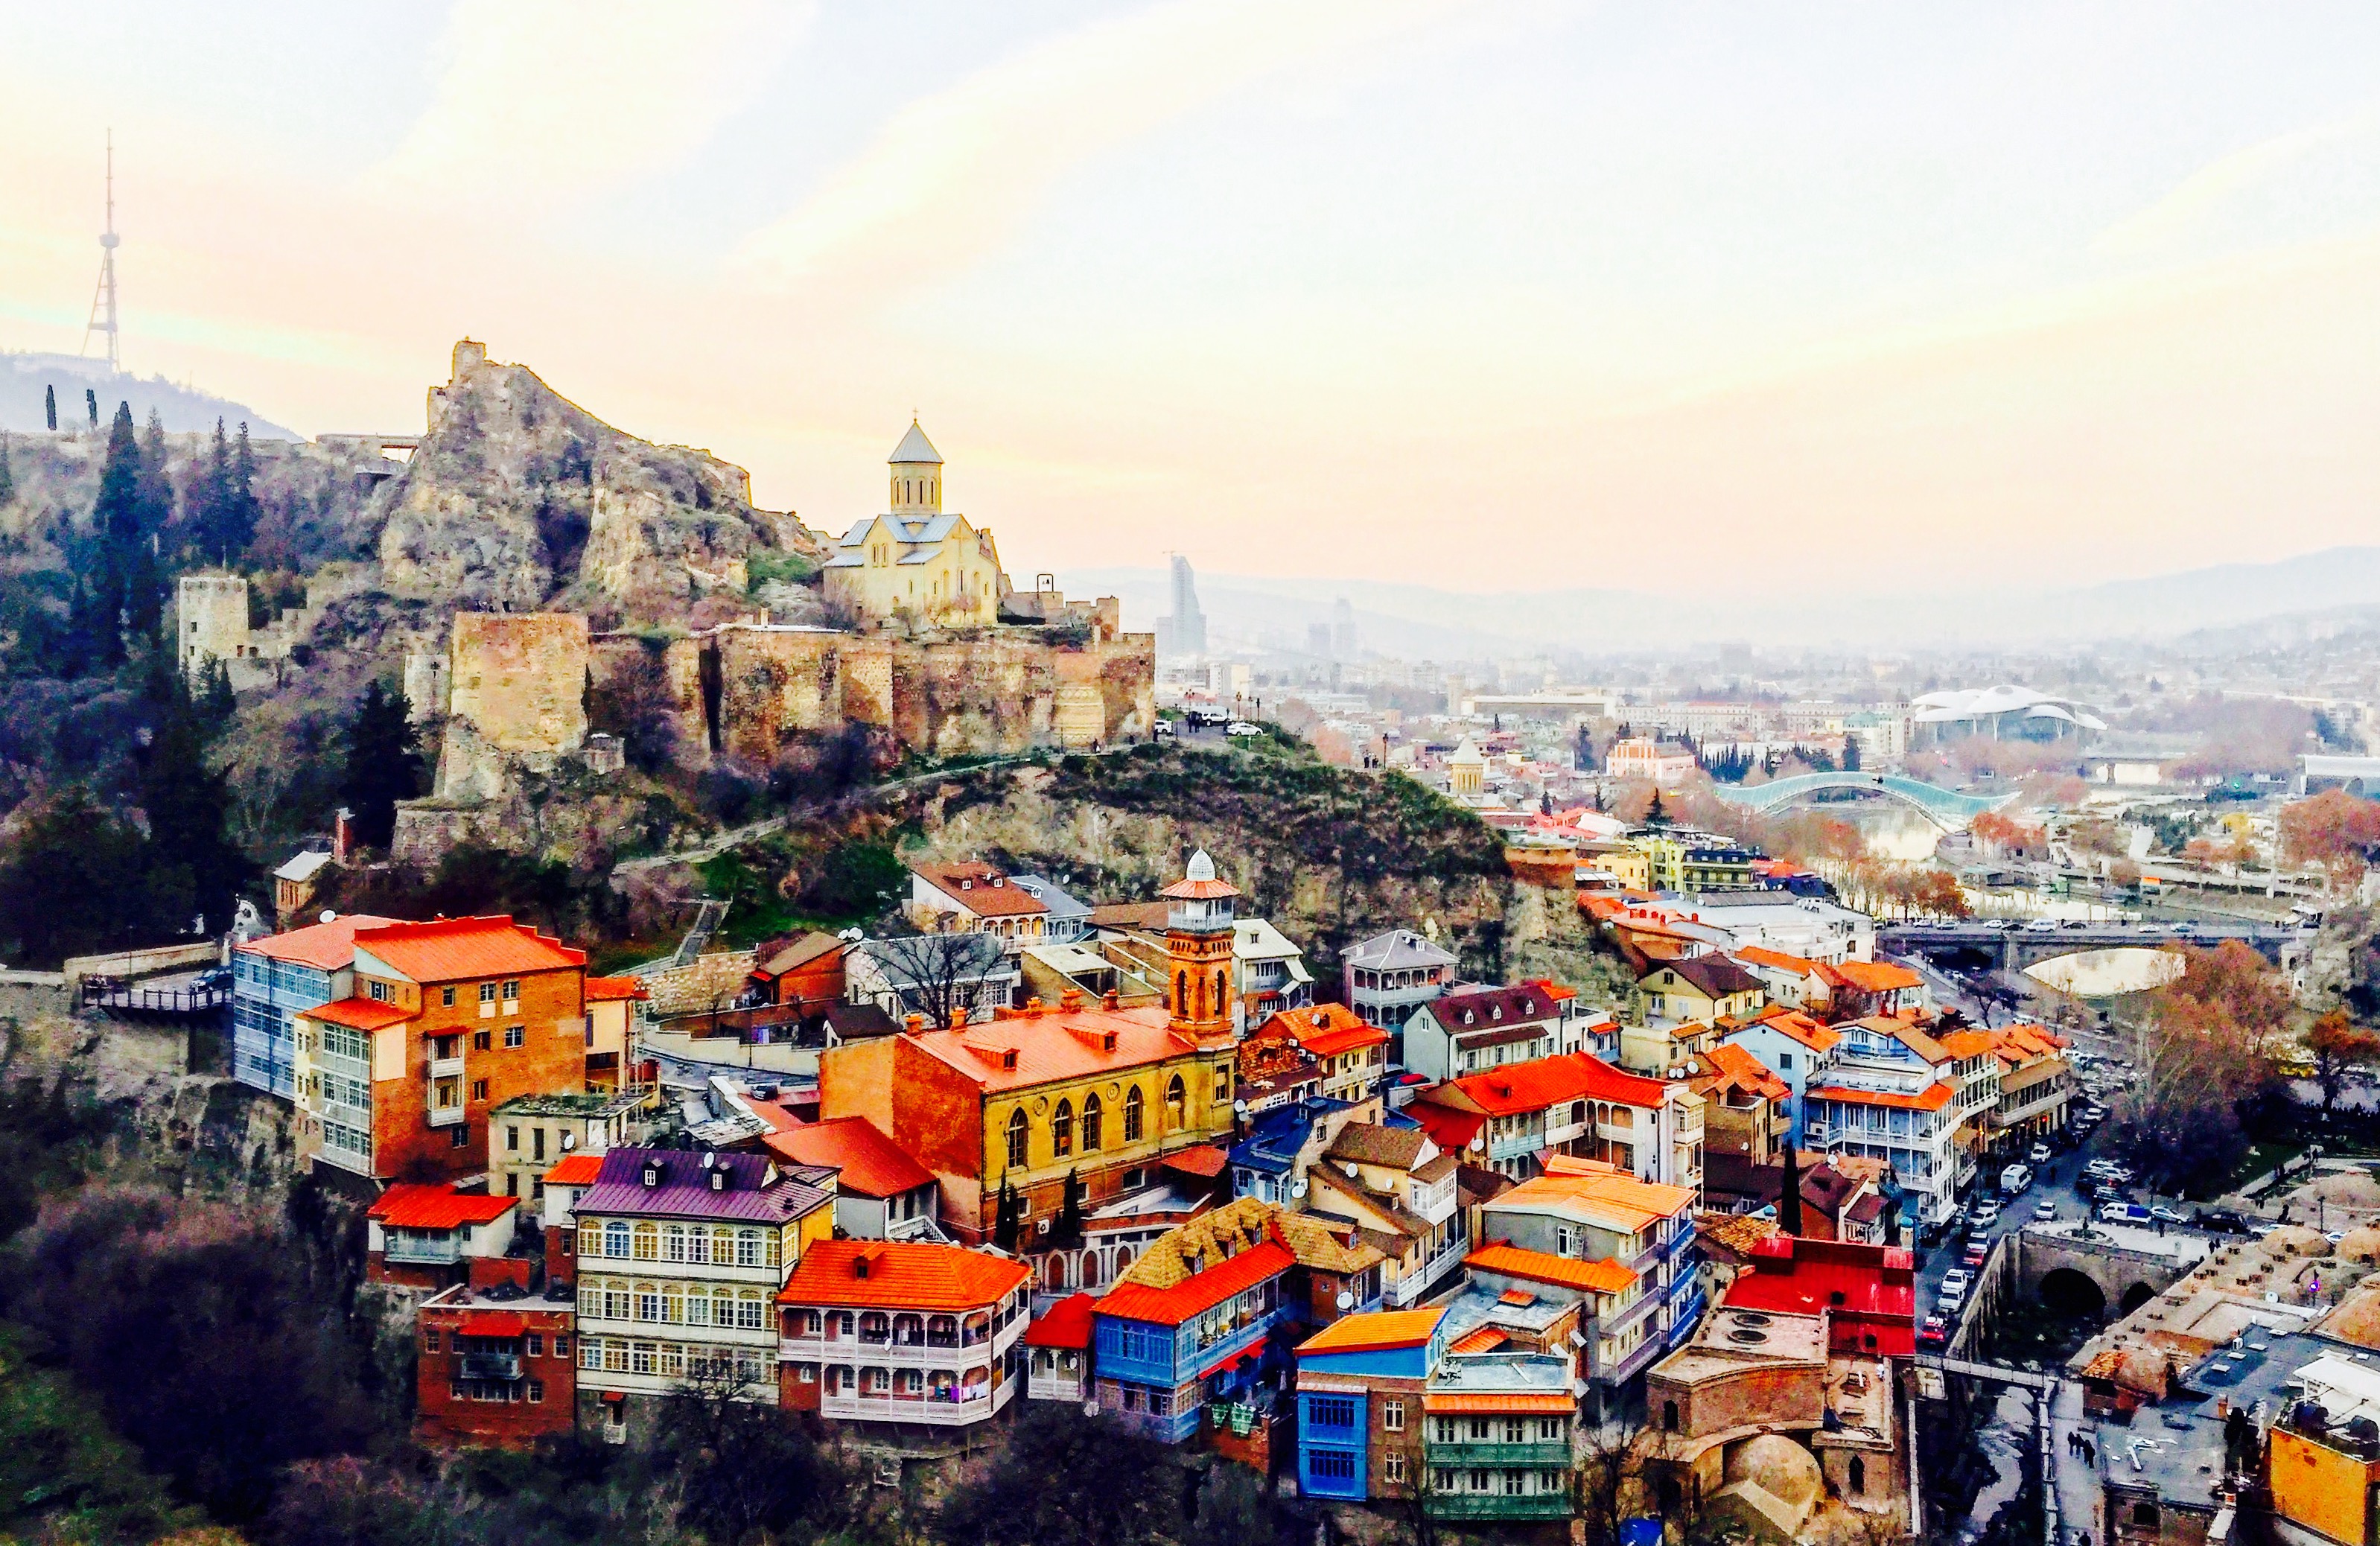 Tbilisi_View_from_the_Top